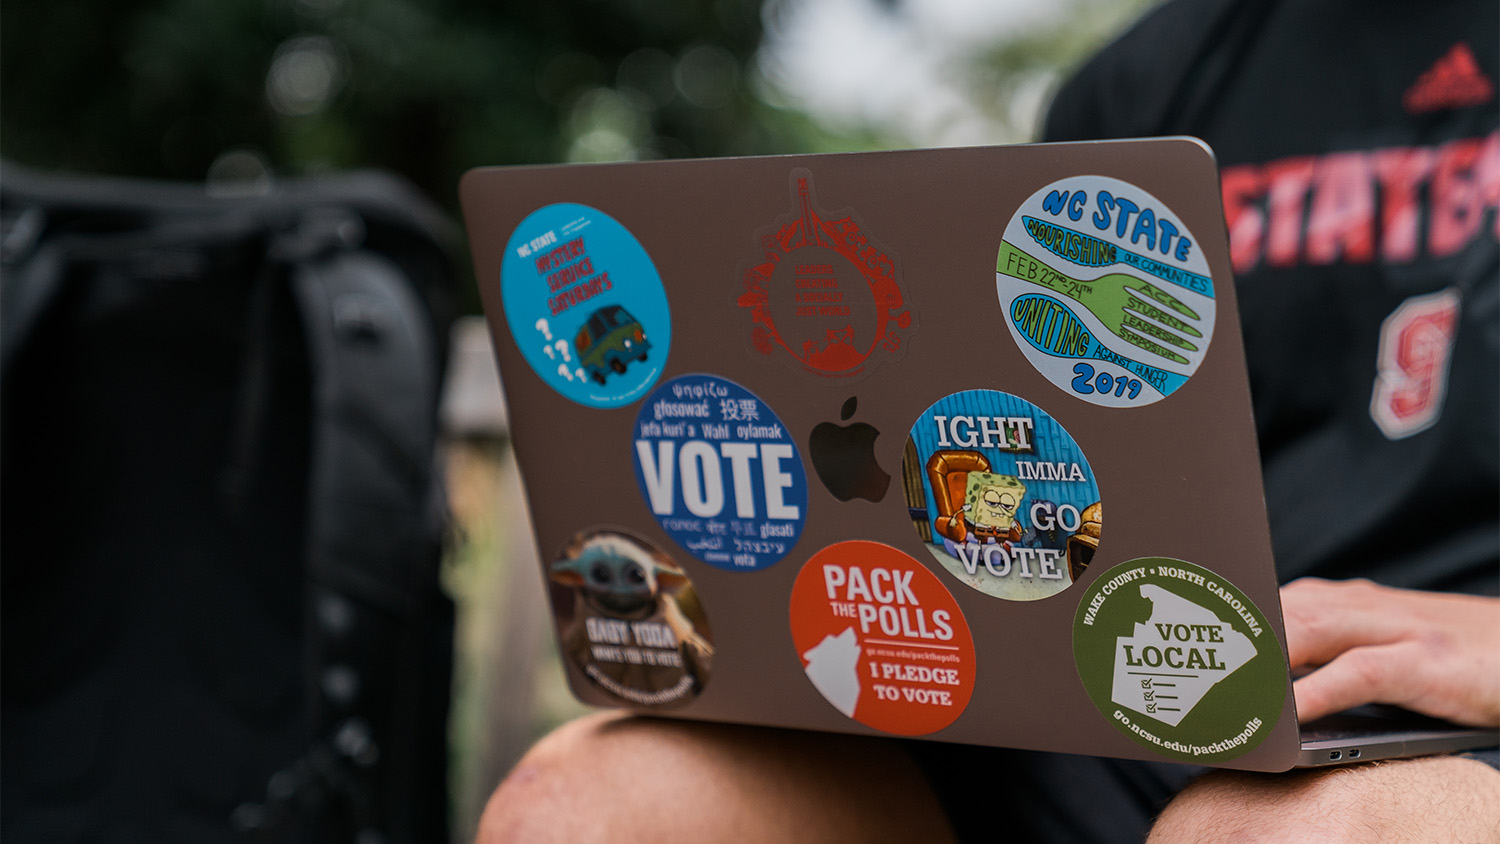 Hands typing on a laptop covered in stickers related to voting